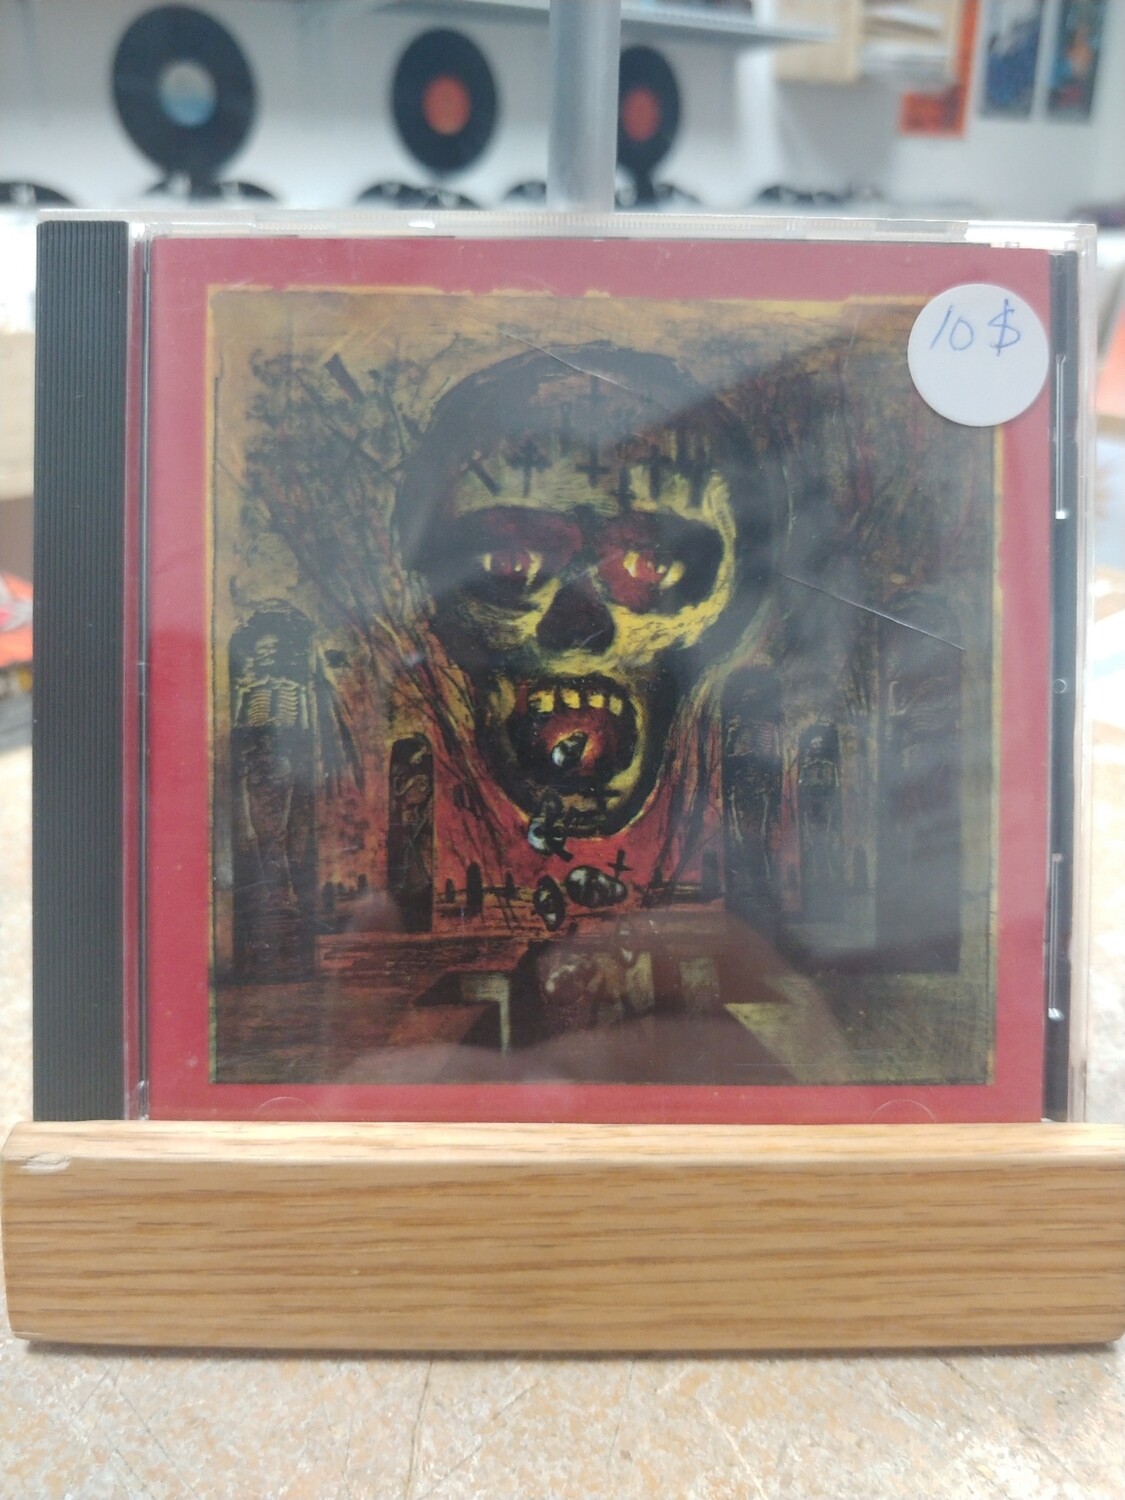 Slayer - Seasons in the abyss (CD)